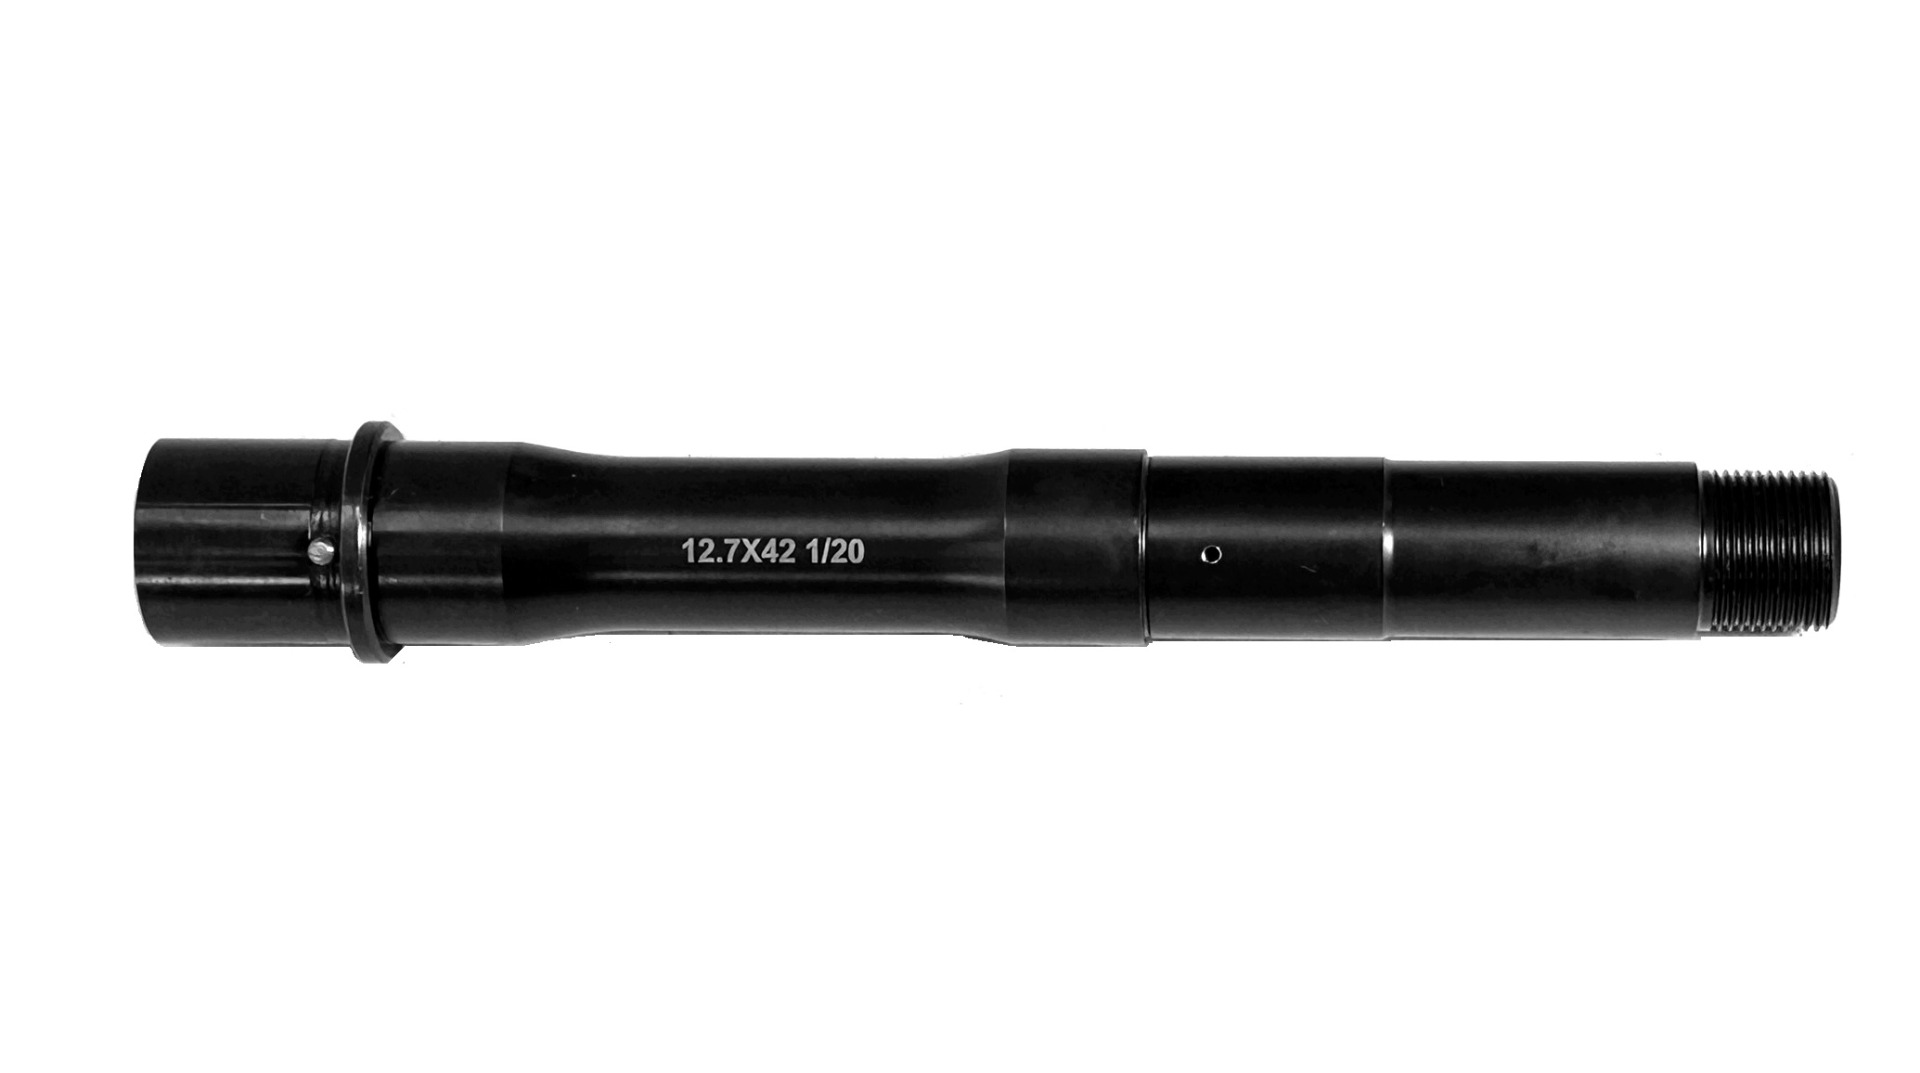 7.5 inch 50 Beowulf Nitride Barrel | Made in the USA